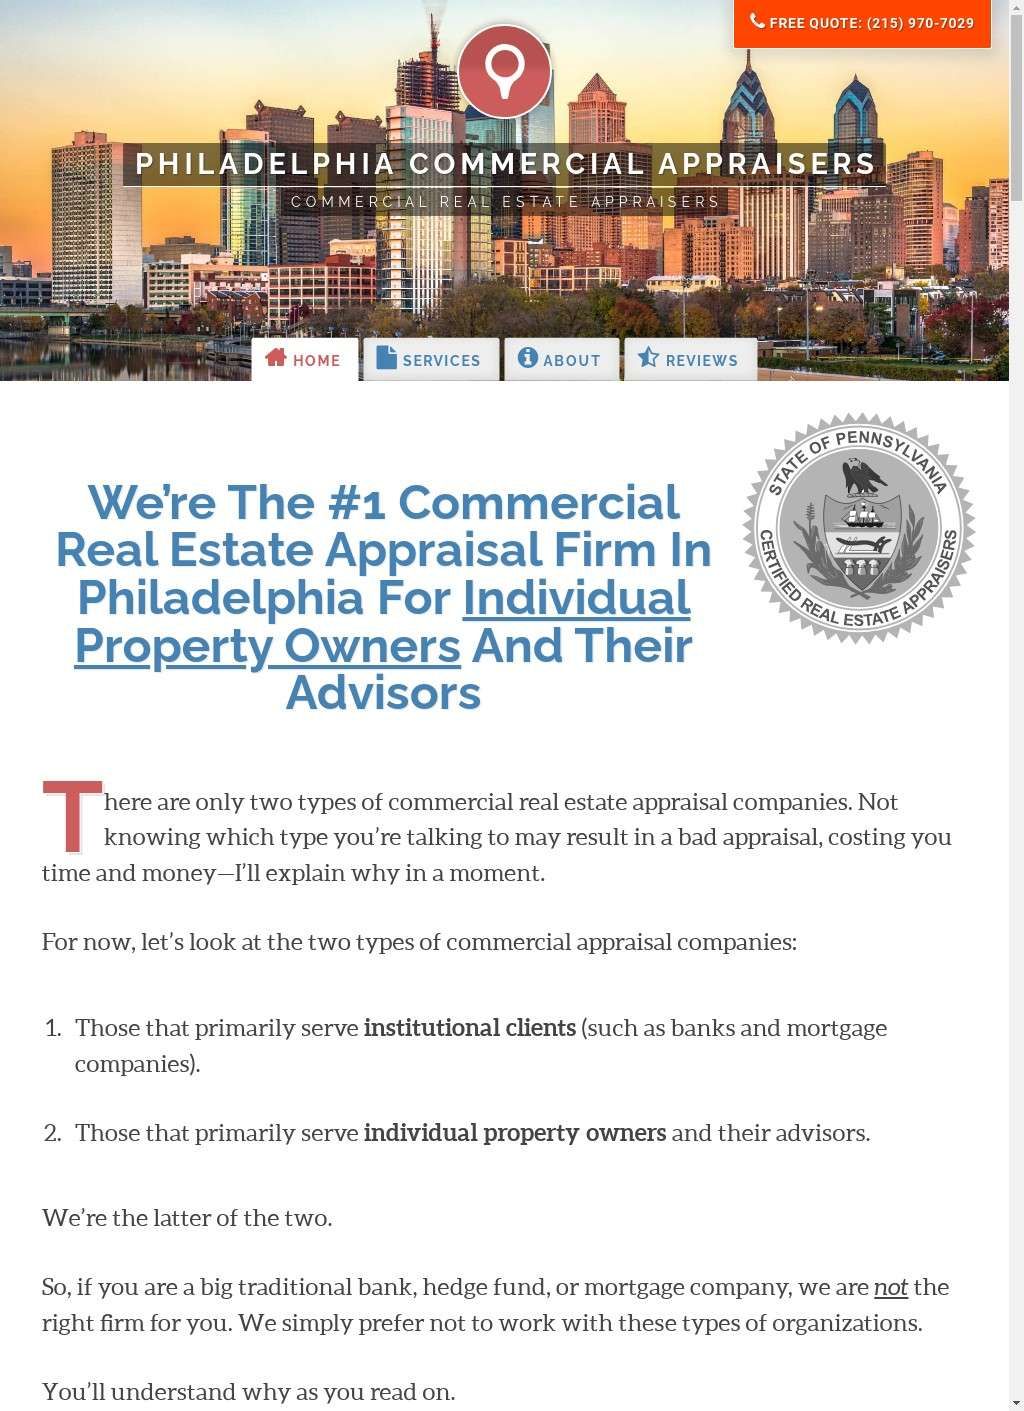 Appraisers of Philadelphia Commercial Property